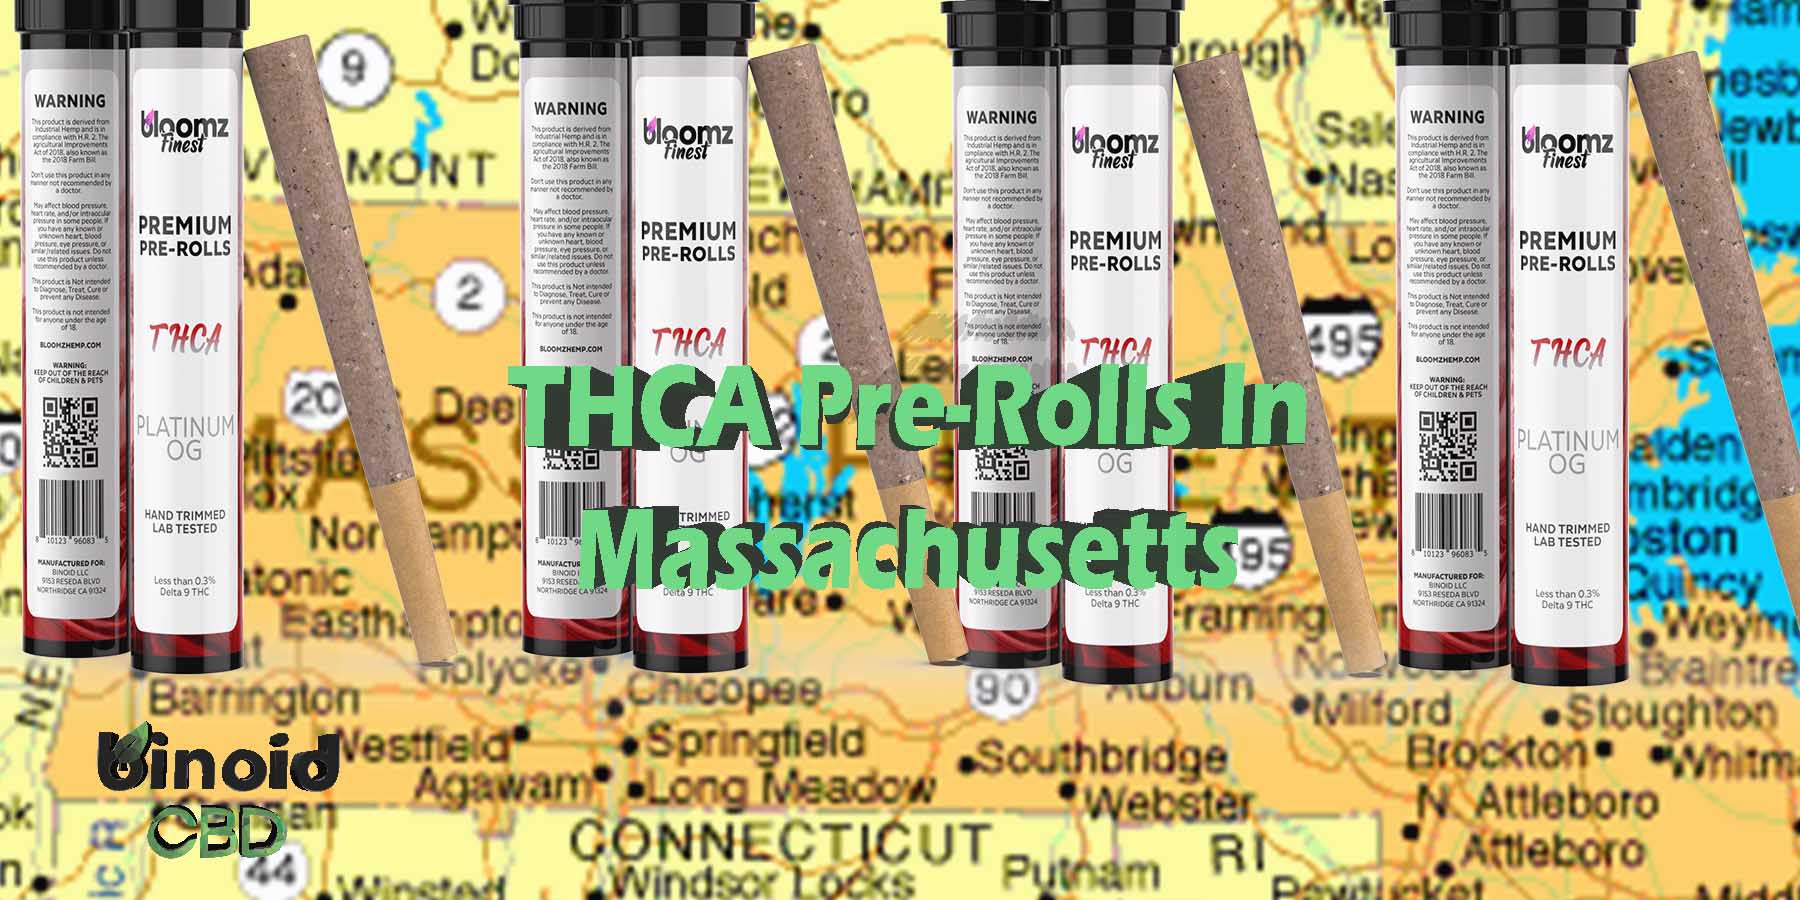 THCA Pre-Rolls In Massachusetts Pre-Rolls Hemp Flower Indica Where To Get Near Me Best Place Lowest Price Coupon Discount Strongest Brand Bloomz